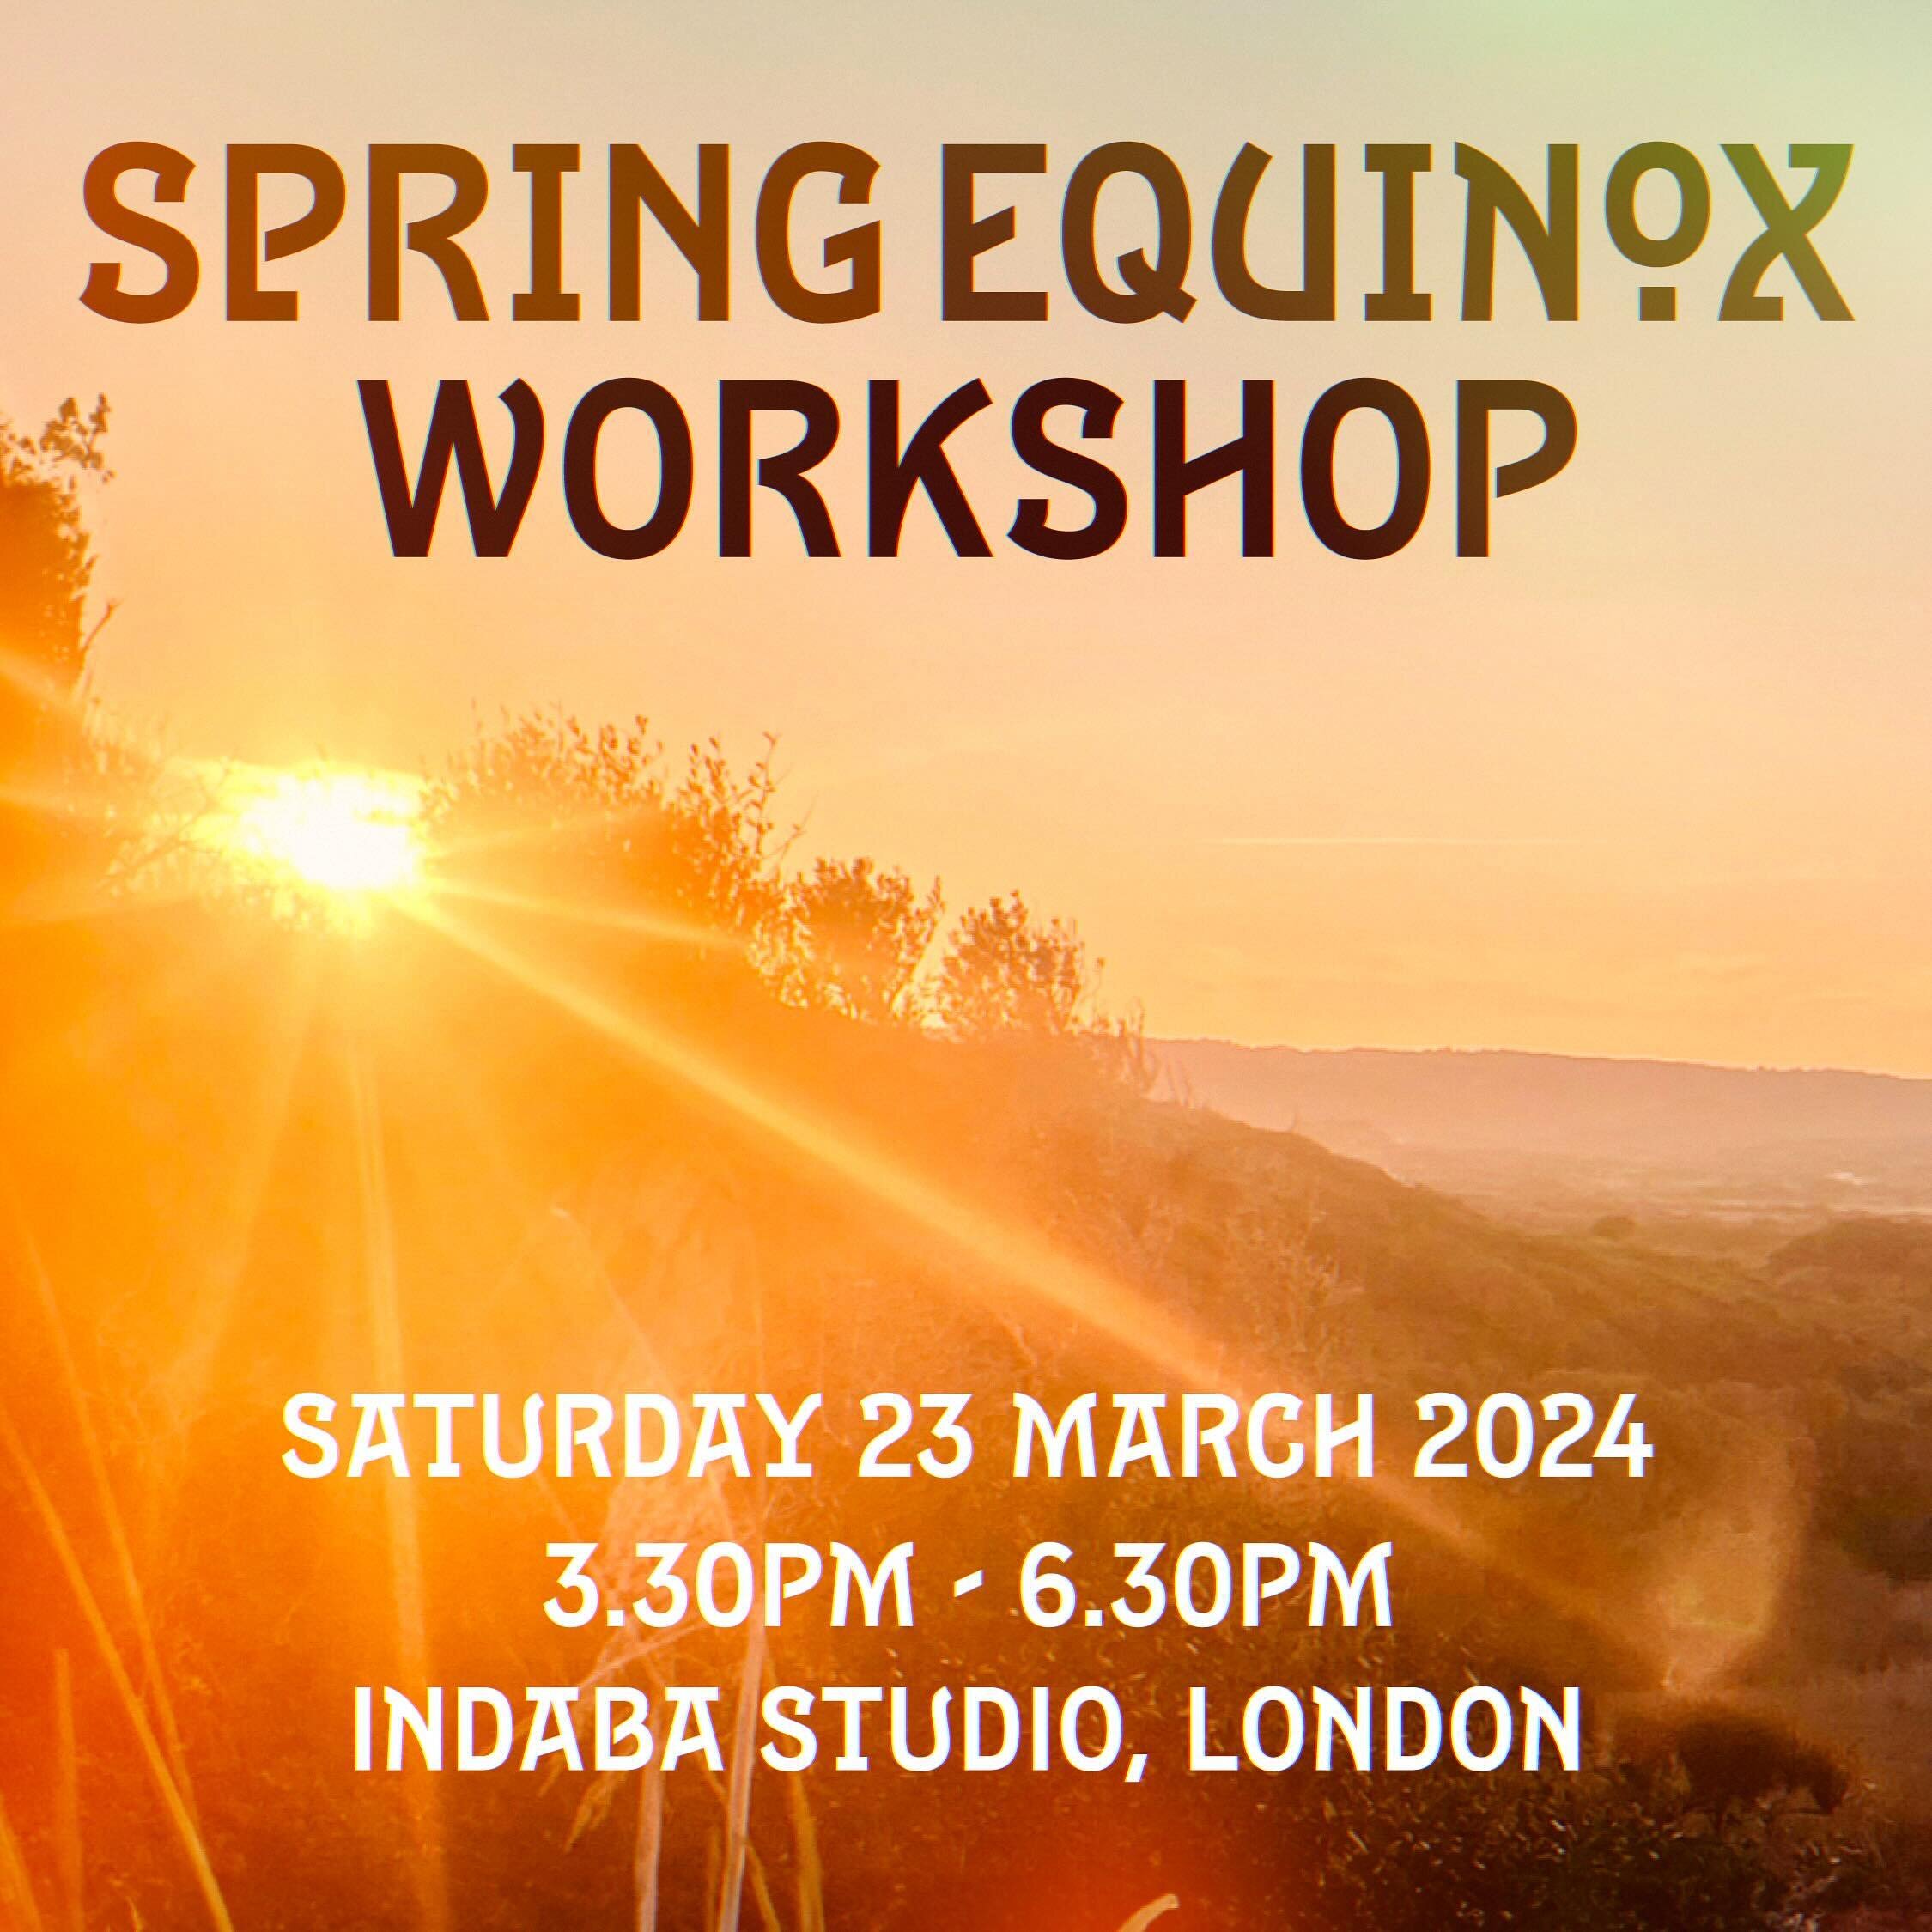 spring equinox love and blessings ☀️&hearts;️☀️&hearts;️☀️&hearts;️☀️
and just like that here we are at mid point between the winter and the summer solstice☀️
we are invited to consider the seeds we are planting today &hearts;️
we are invited back to